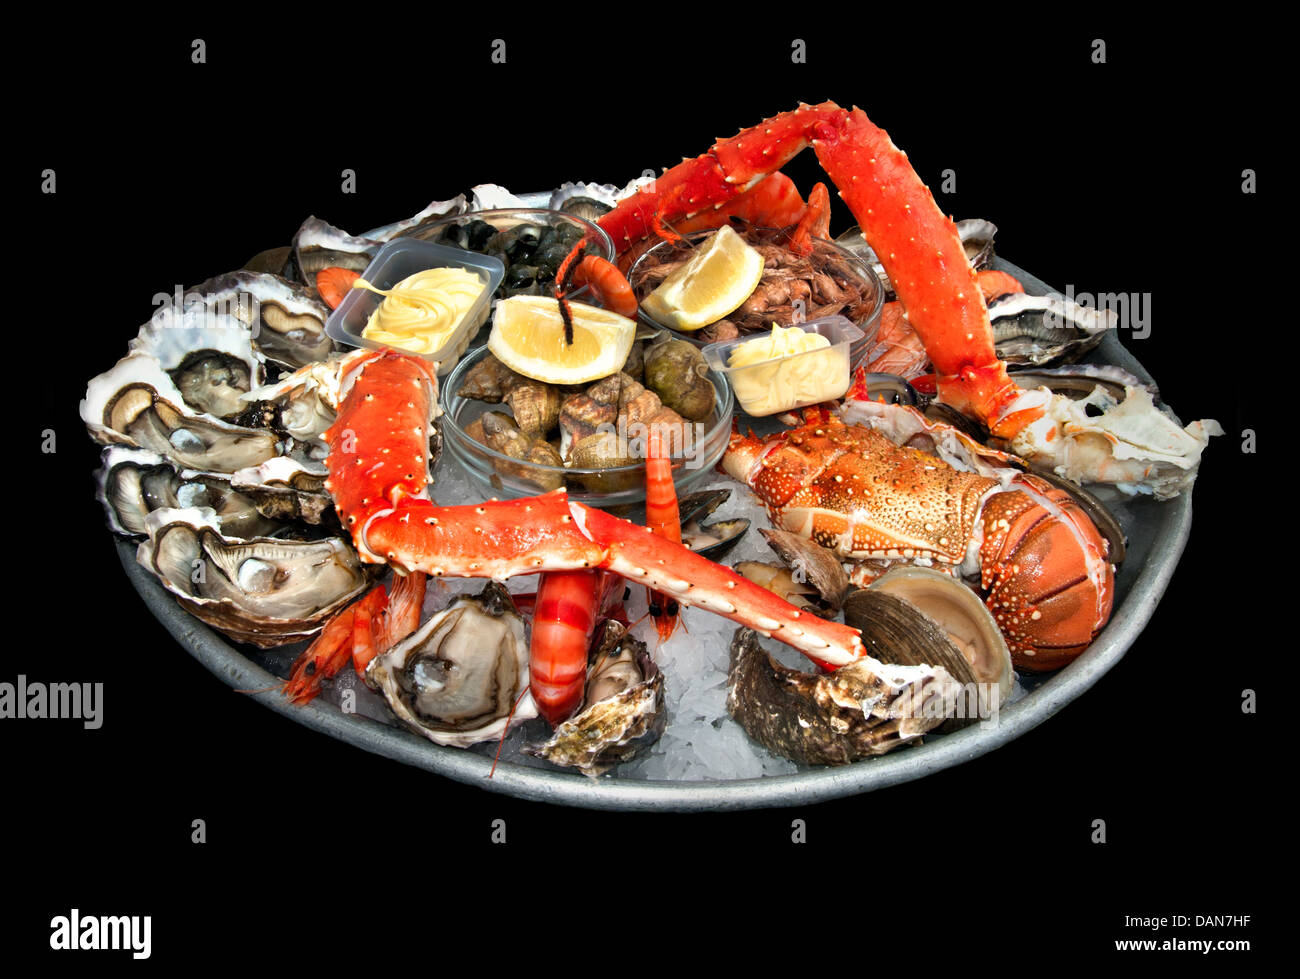 Fruits de mer French seafood Oysters Shrimp Lobster Periwinkle Crab Prawns Langoustine Mussels Scallops Clams Stock Photo